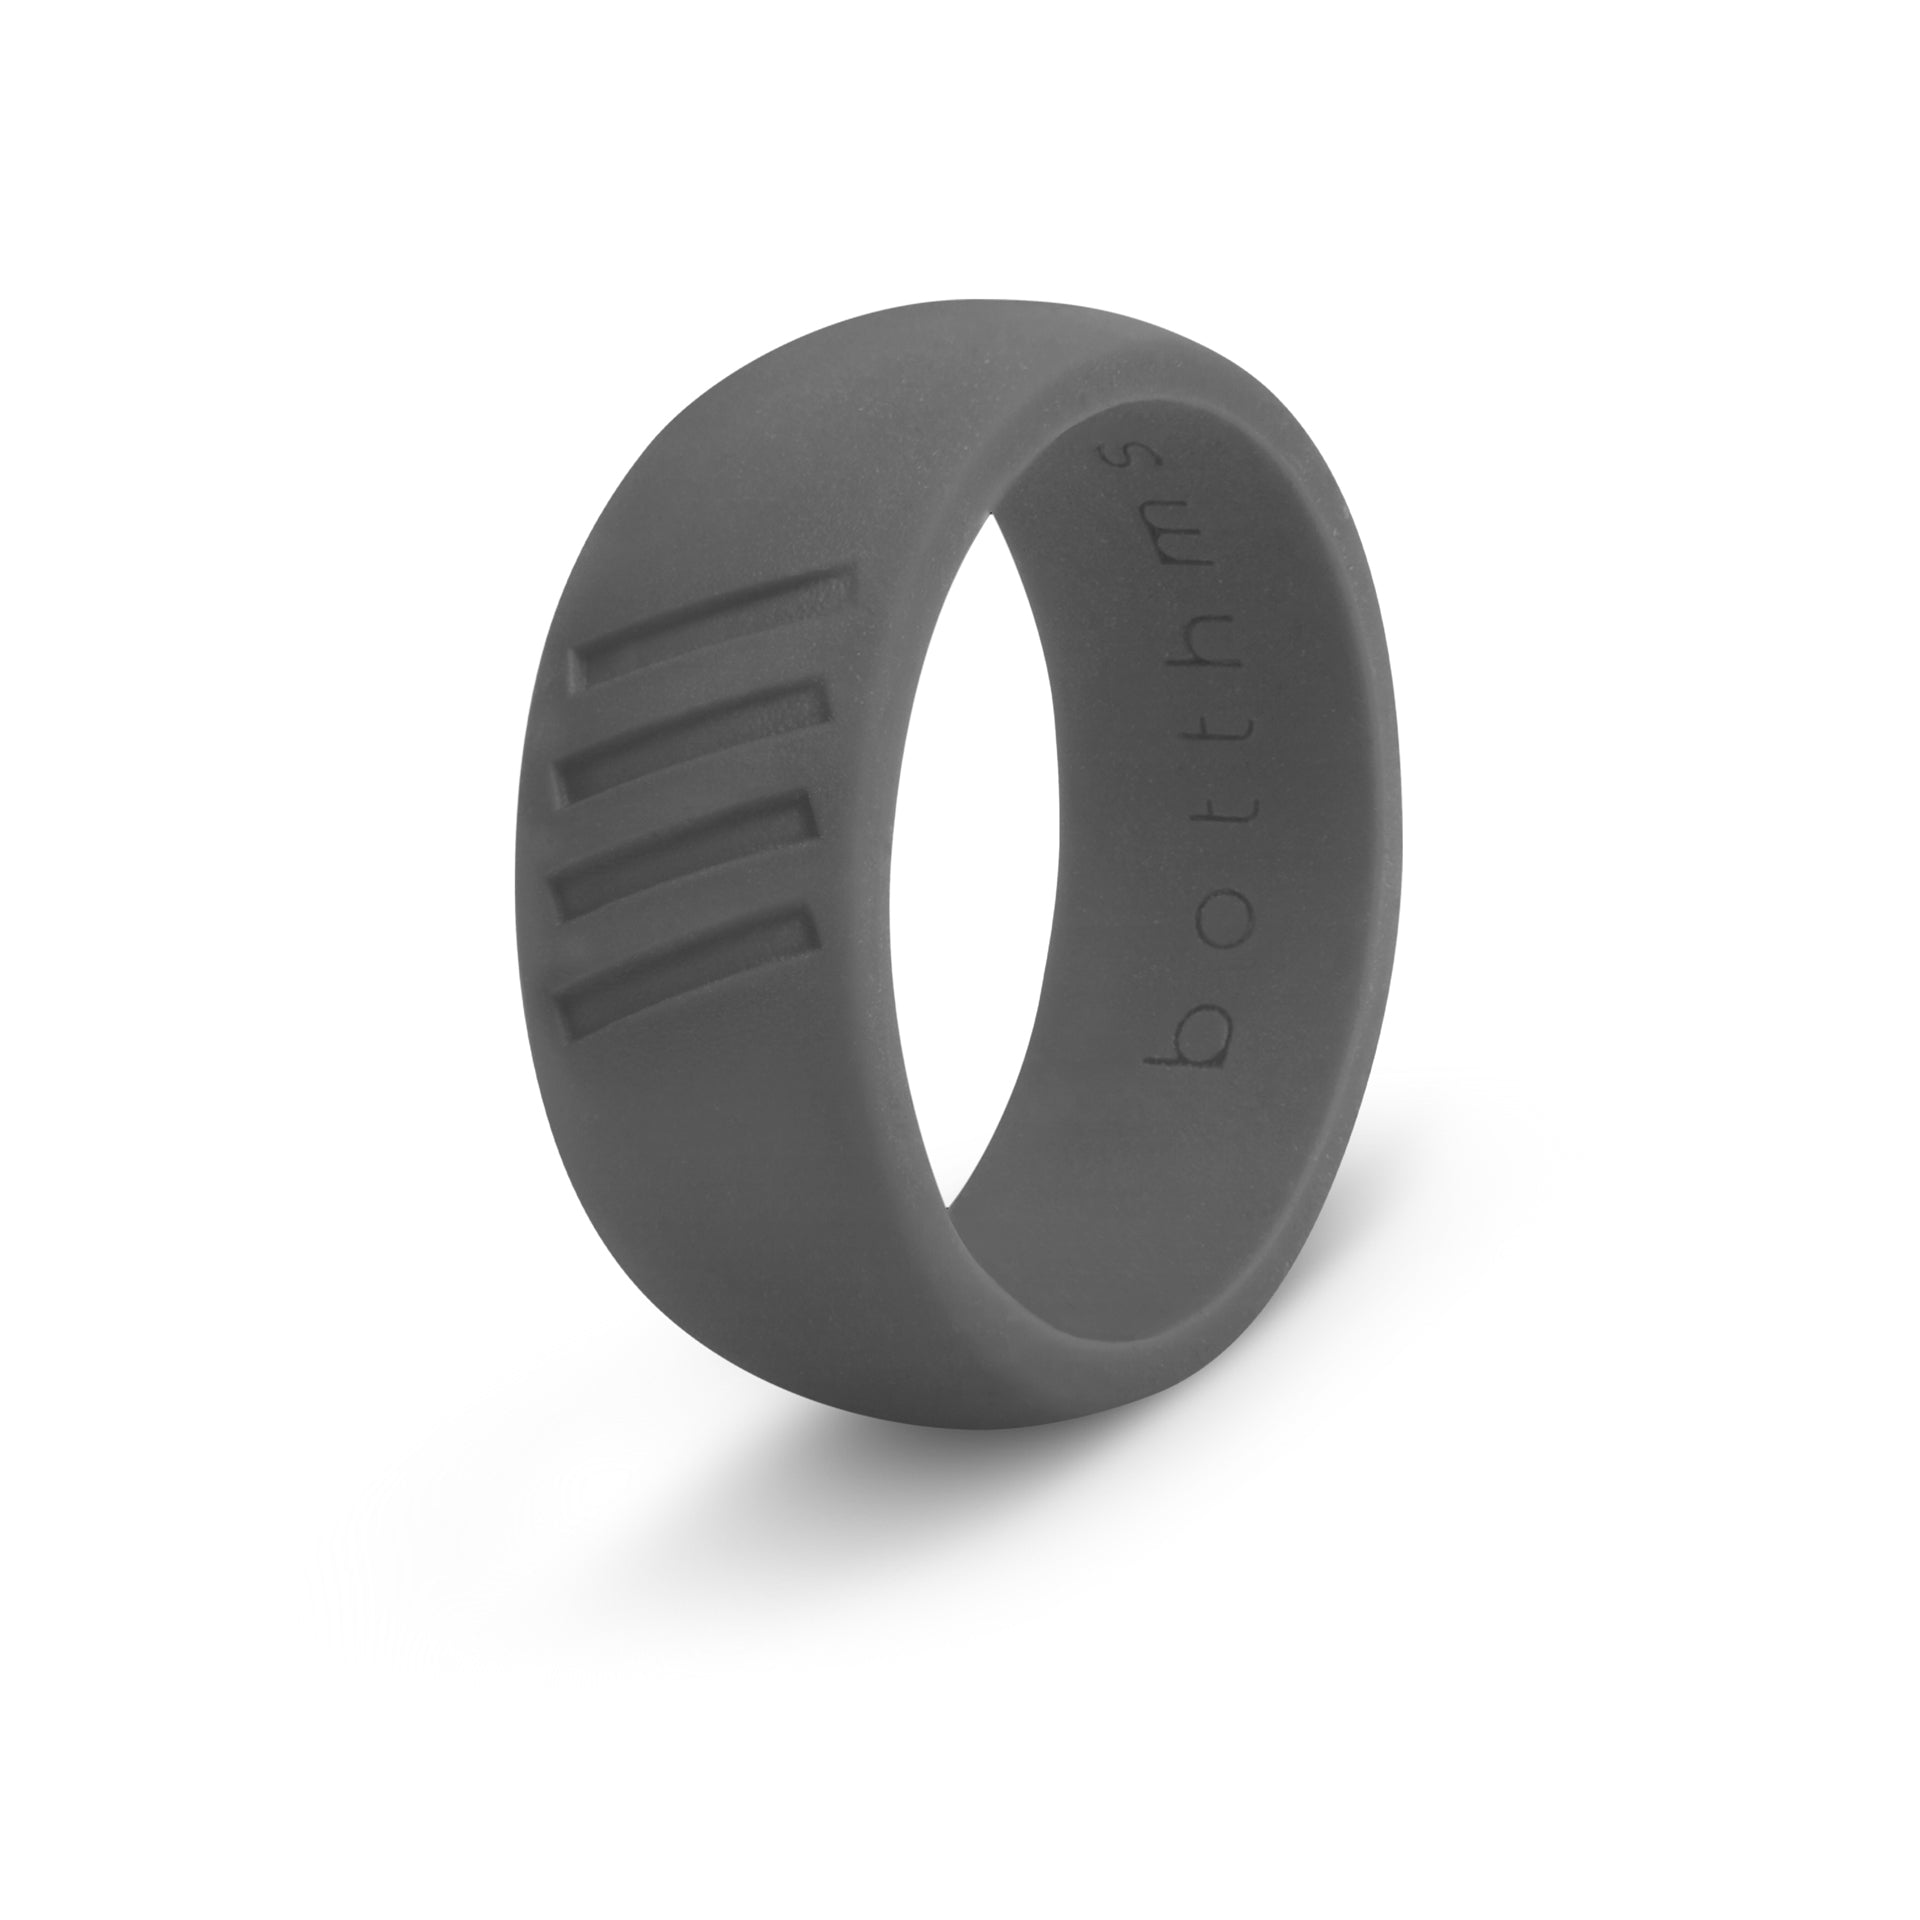 botthms Charcoal Active Stripes Silicone Ring